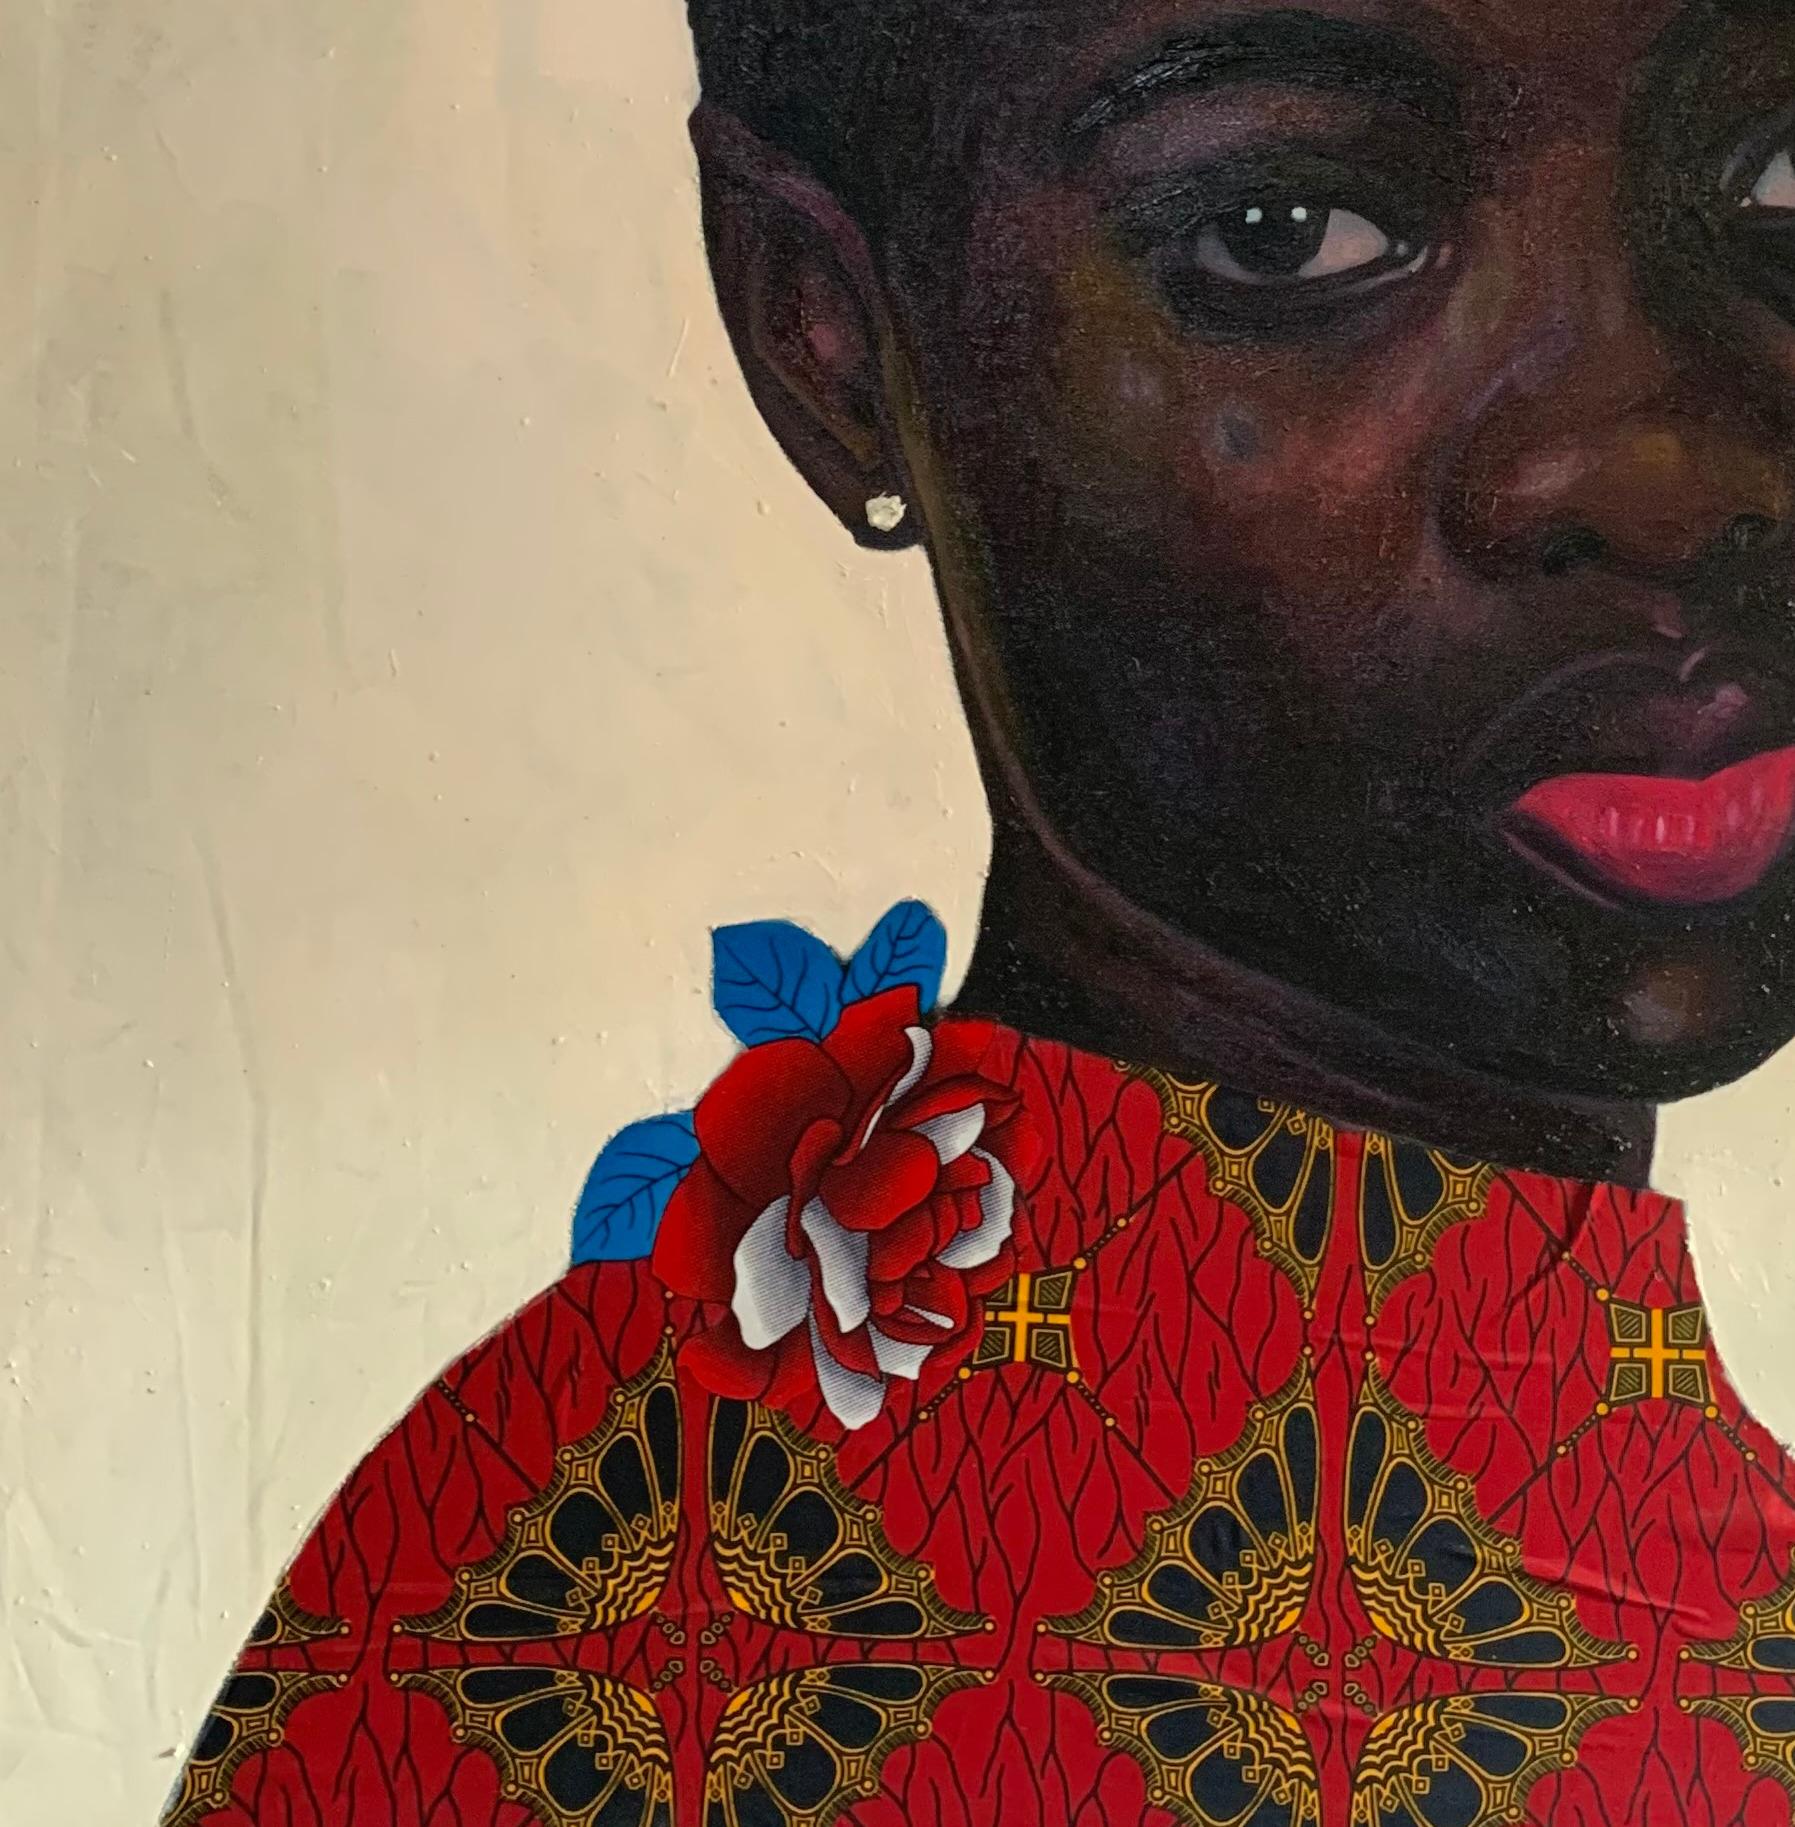 This painting captures the strength and beauty of a black African girl who gazes directly at the viewer with a thought of total liberation. The use of oil on canvas creates a vibrant and expressive piece that emphasizes the features of her face and